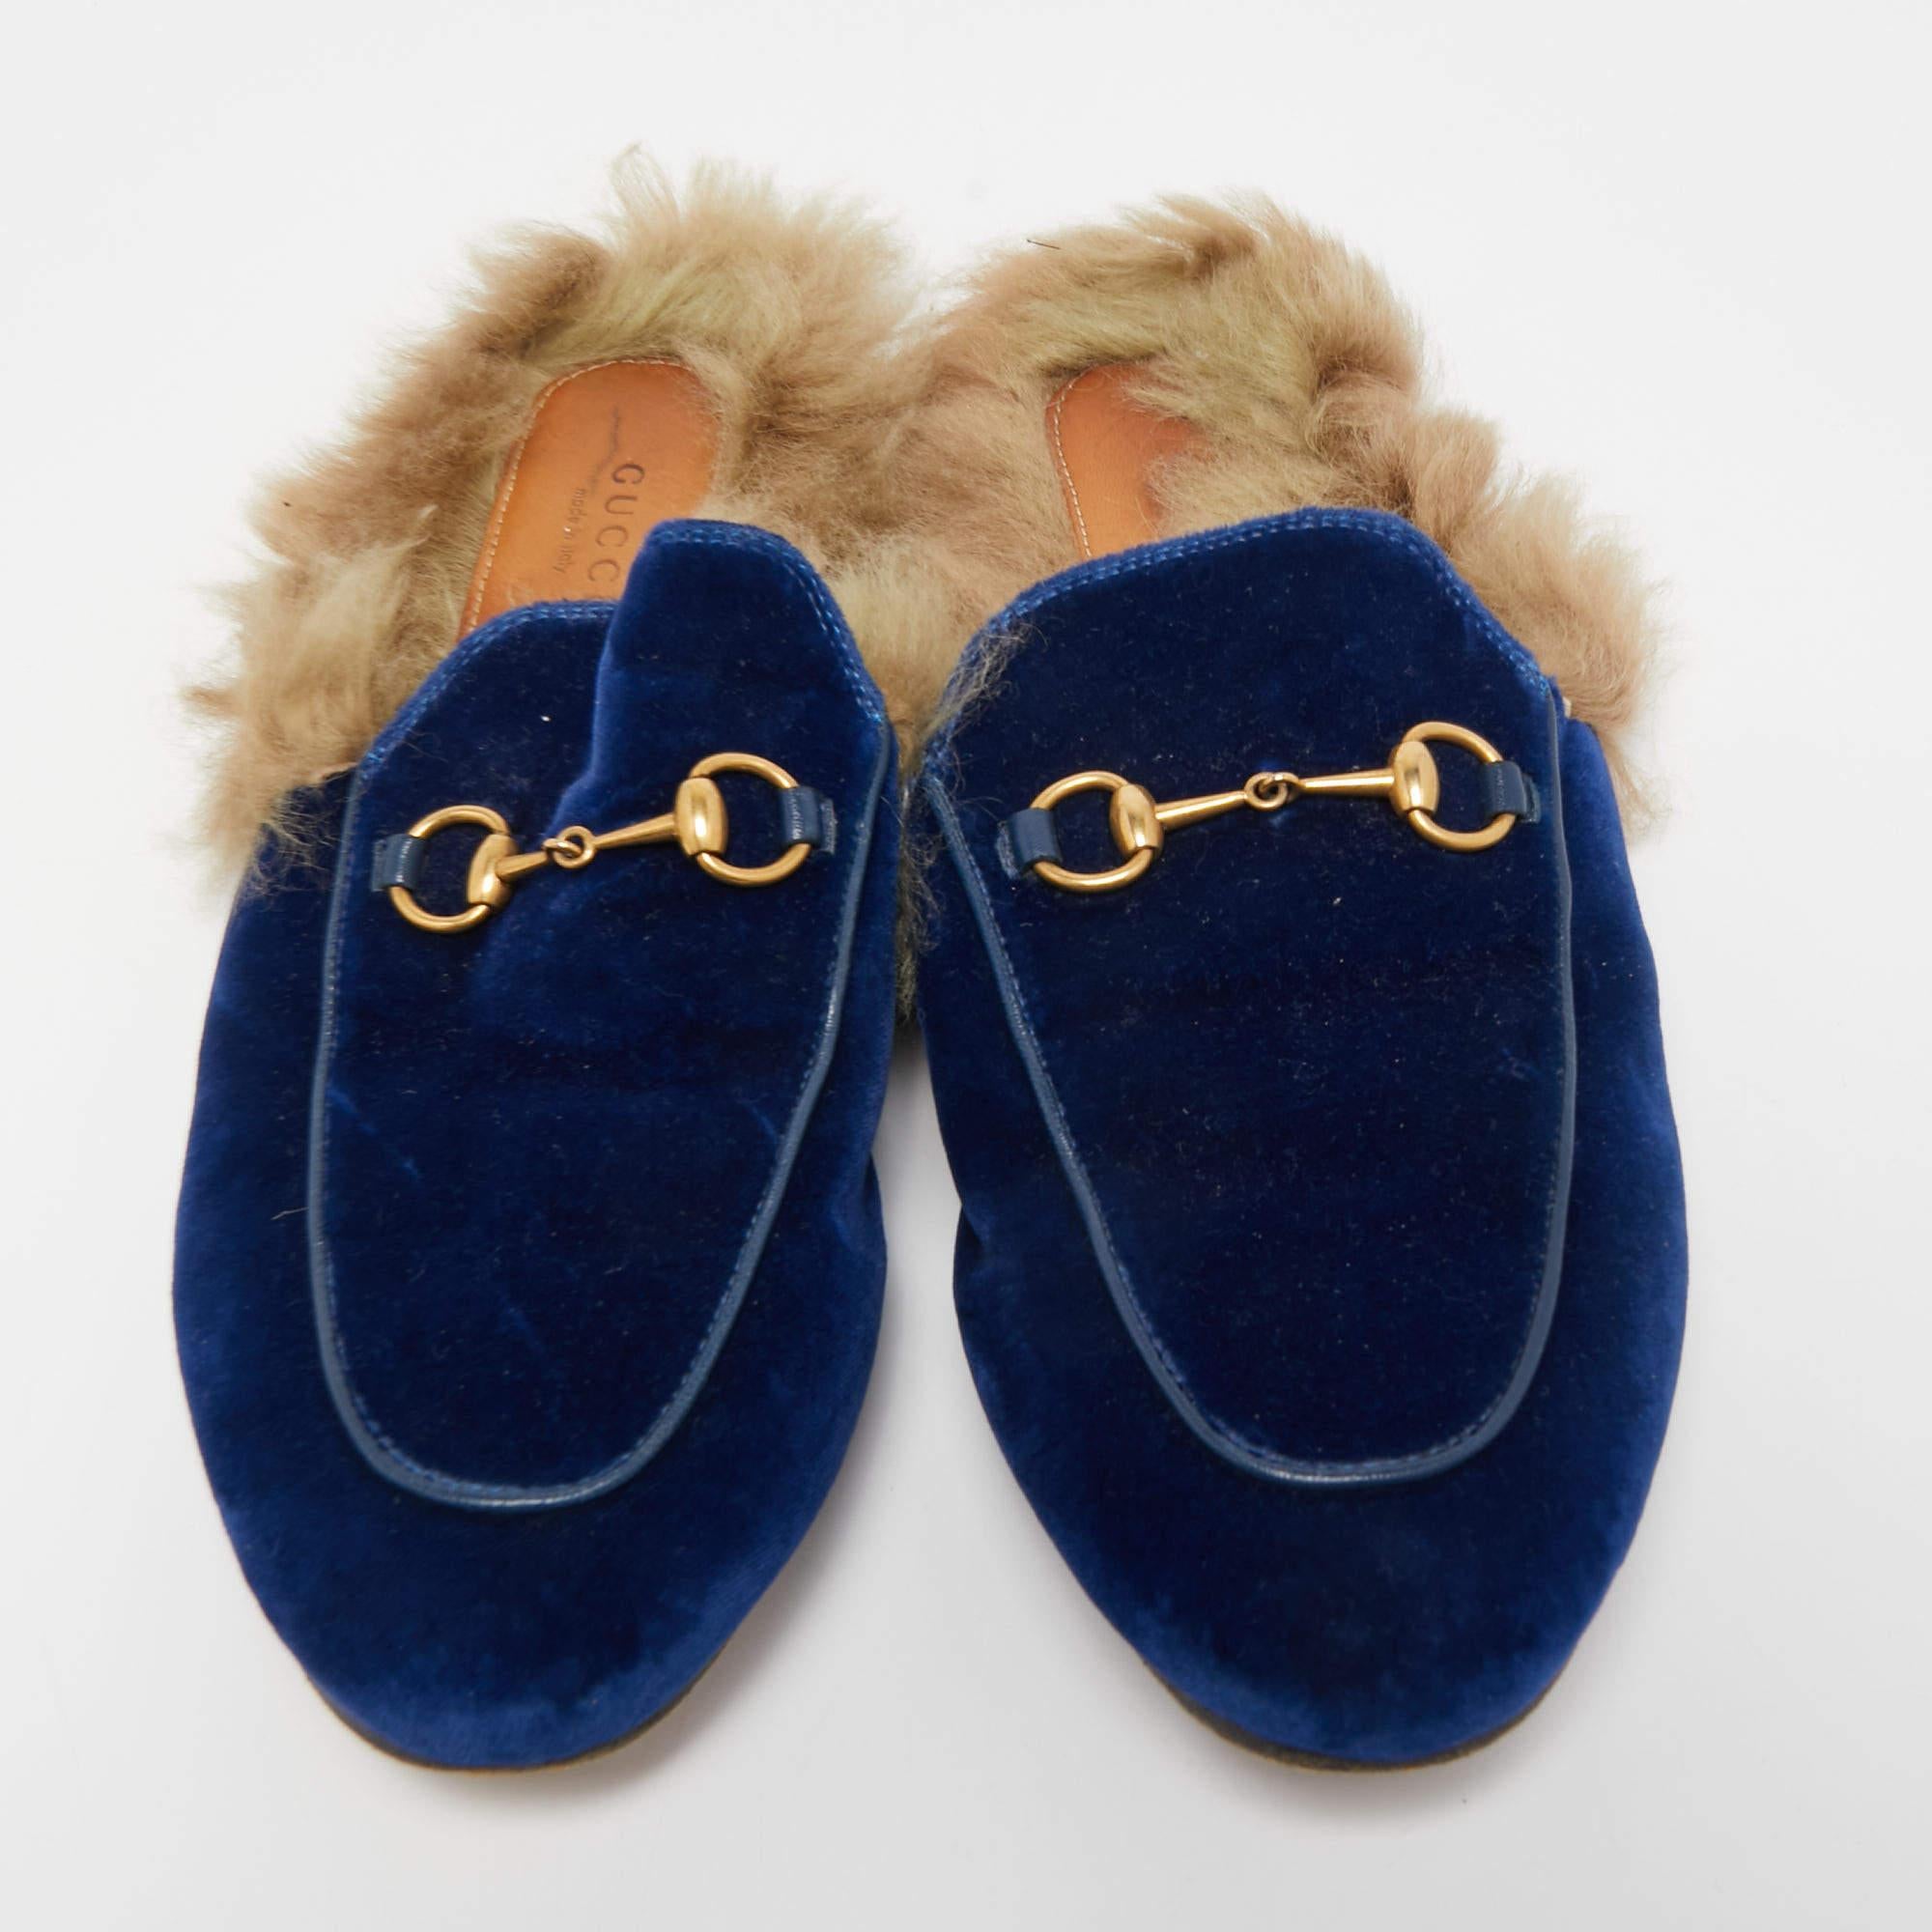 Create effortless styles with these Gucci mules. Made of quality materials, they are designed to elevate your OOTD and keep you in comfort all day long.

